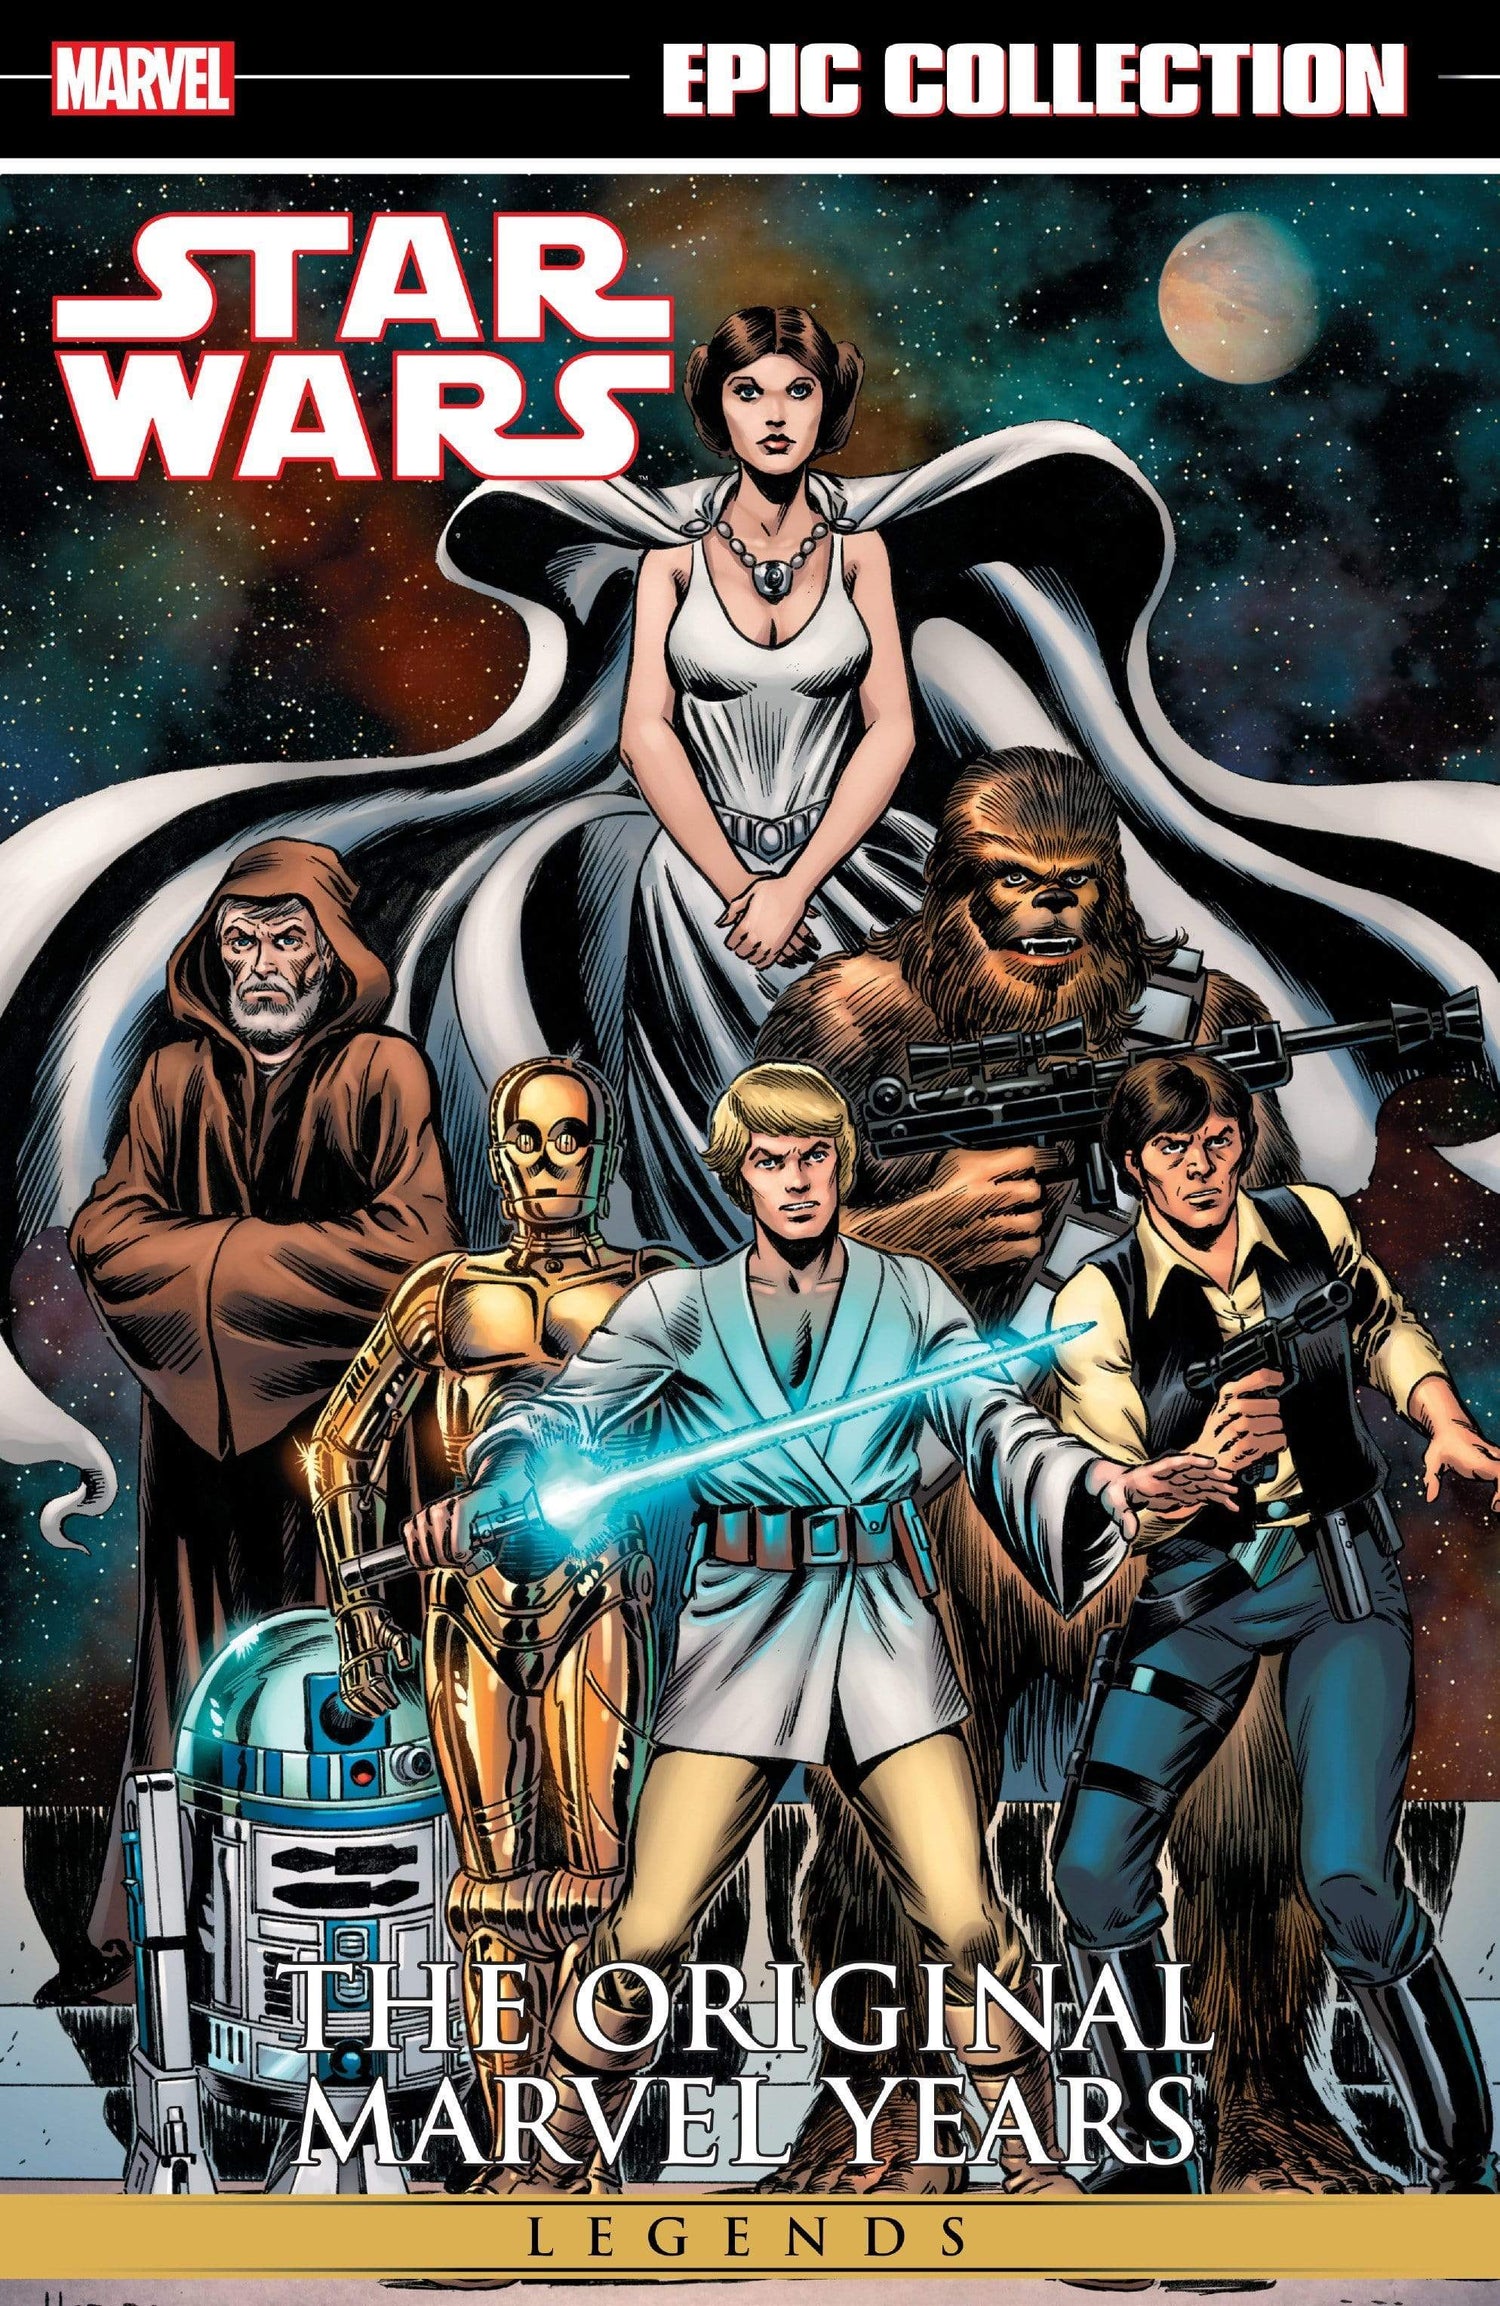 Marvel Epic Collection: Star Wars - The Original Marvel Years Vol. 1